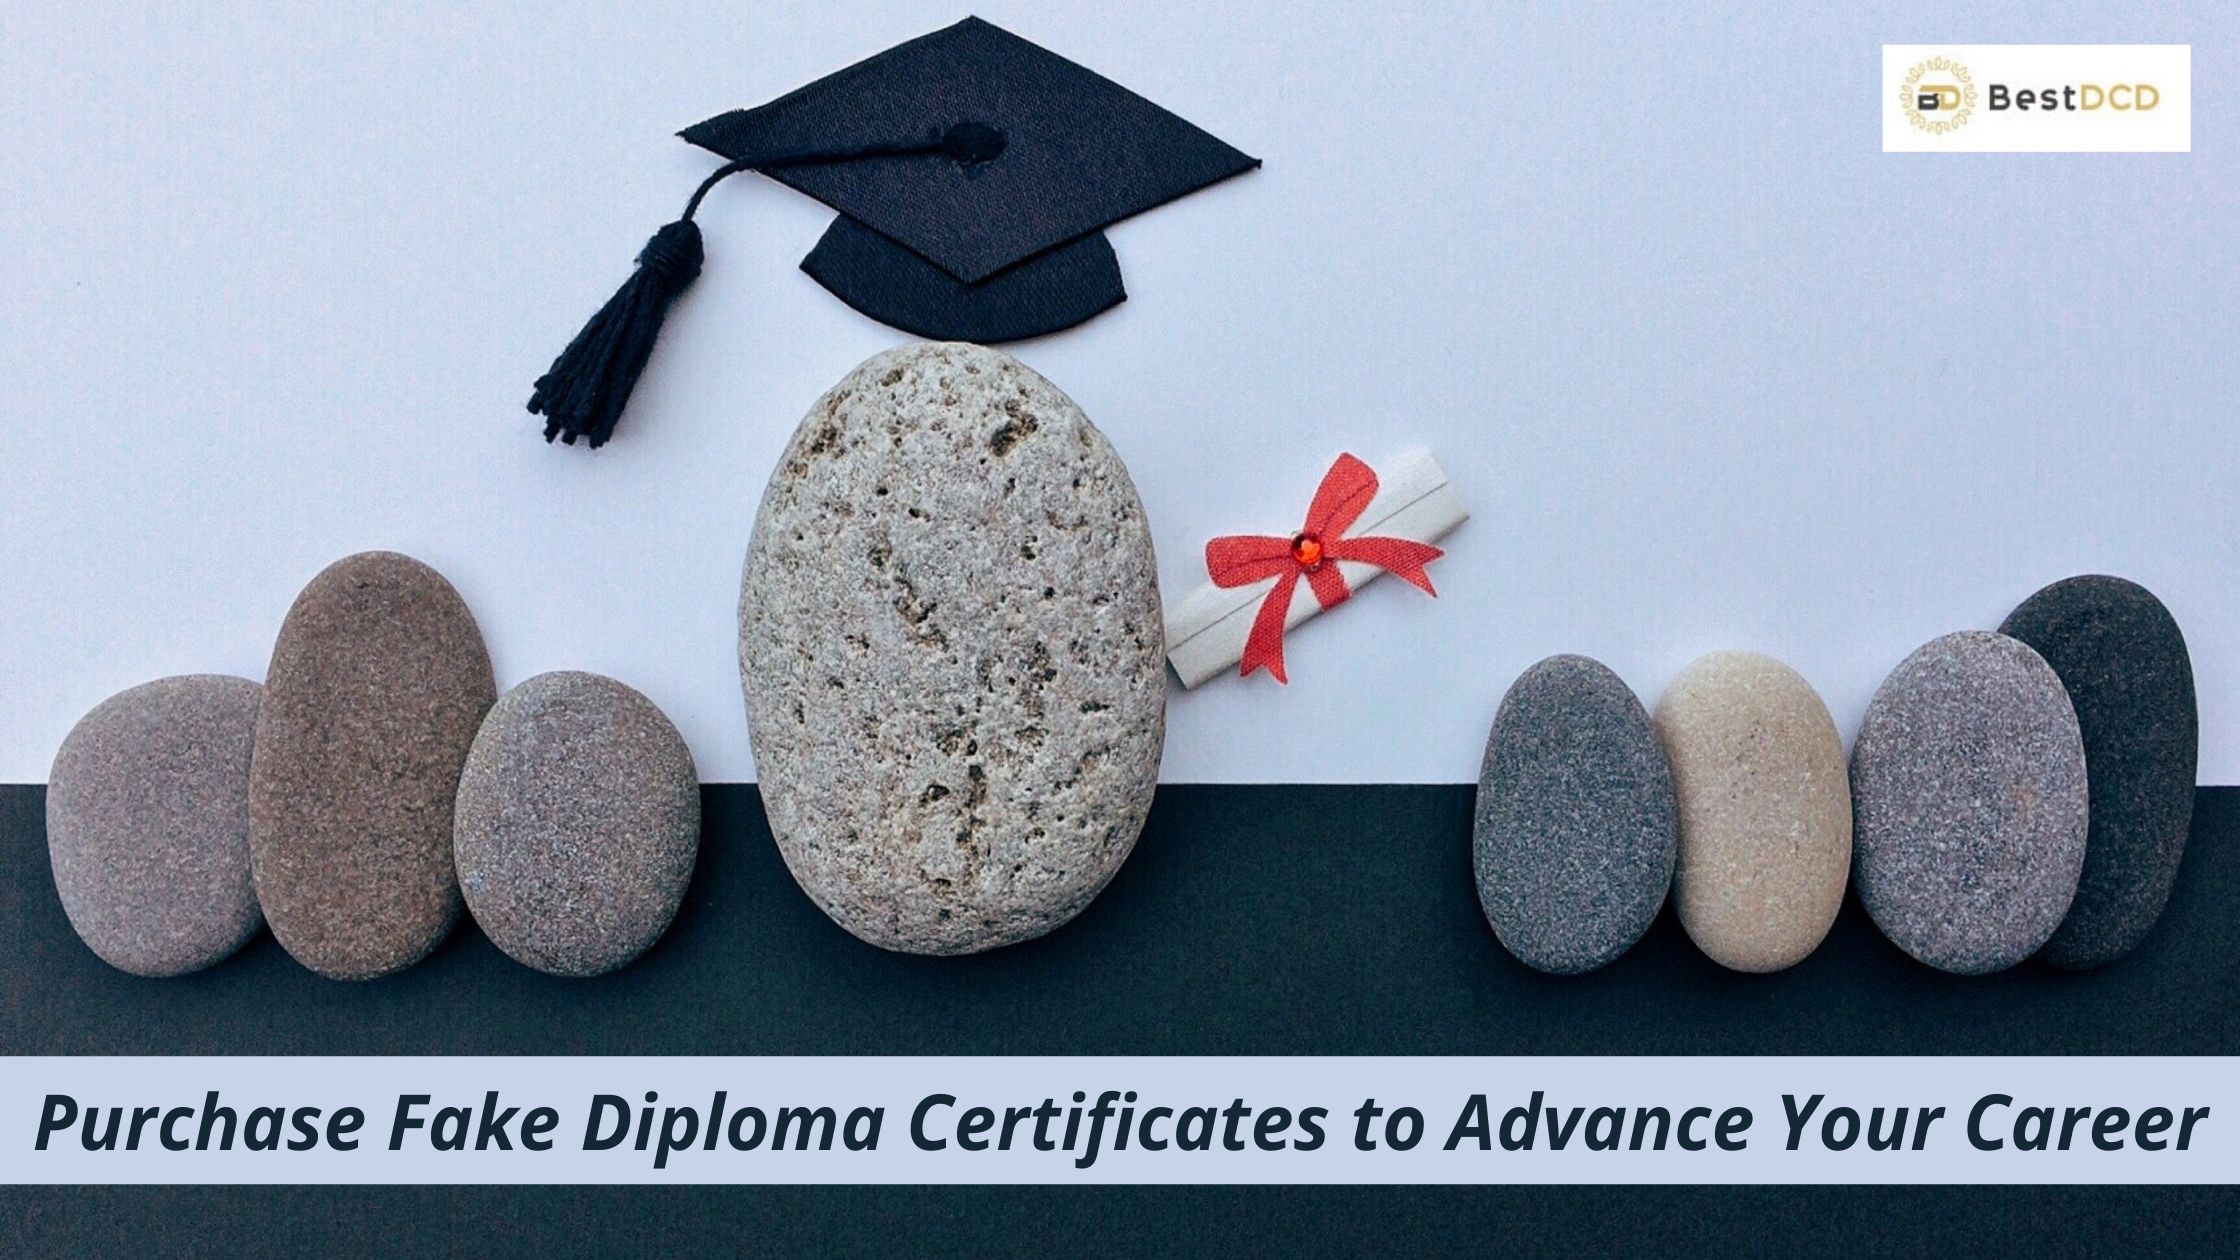 Purchase Fake Diploma Certificates to Advance Your Career